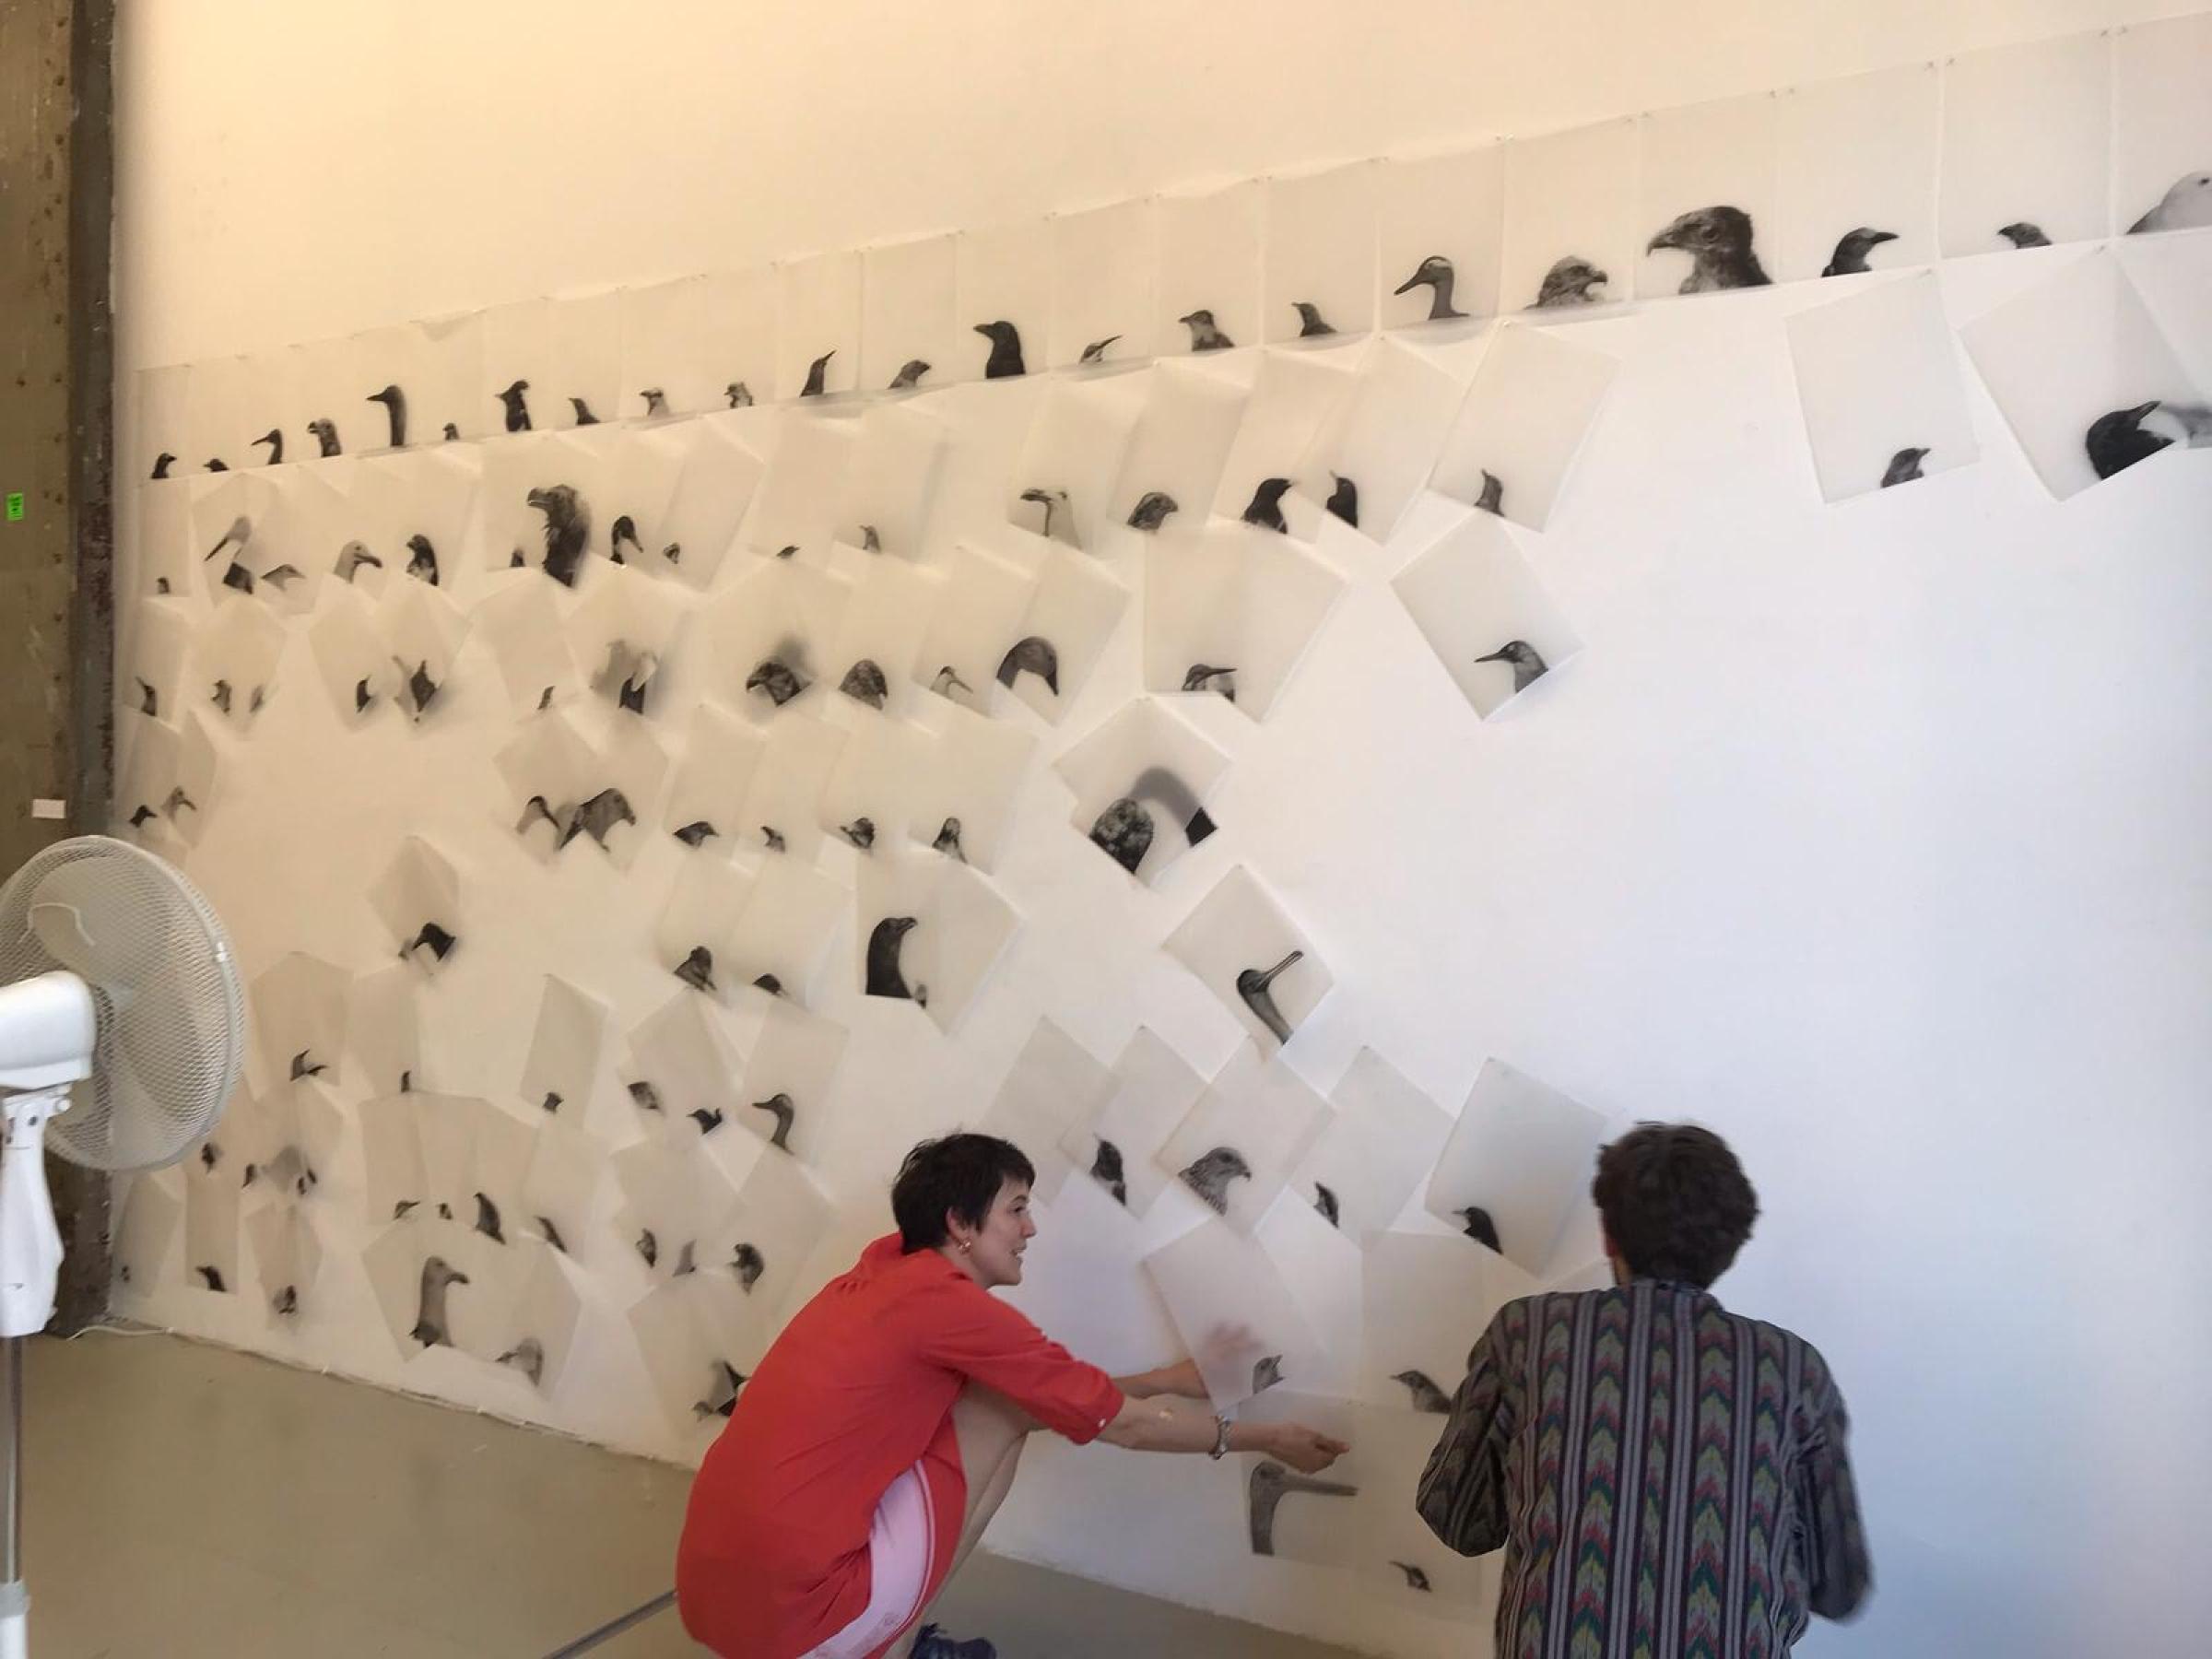 Two people attaching printed images of birds to a gallery wall